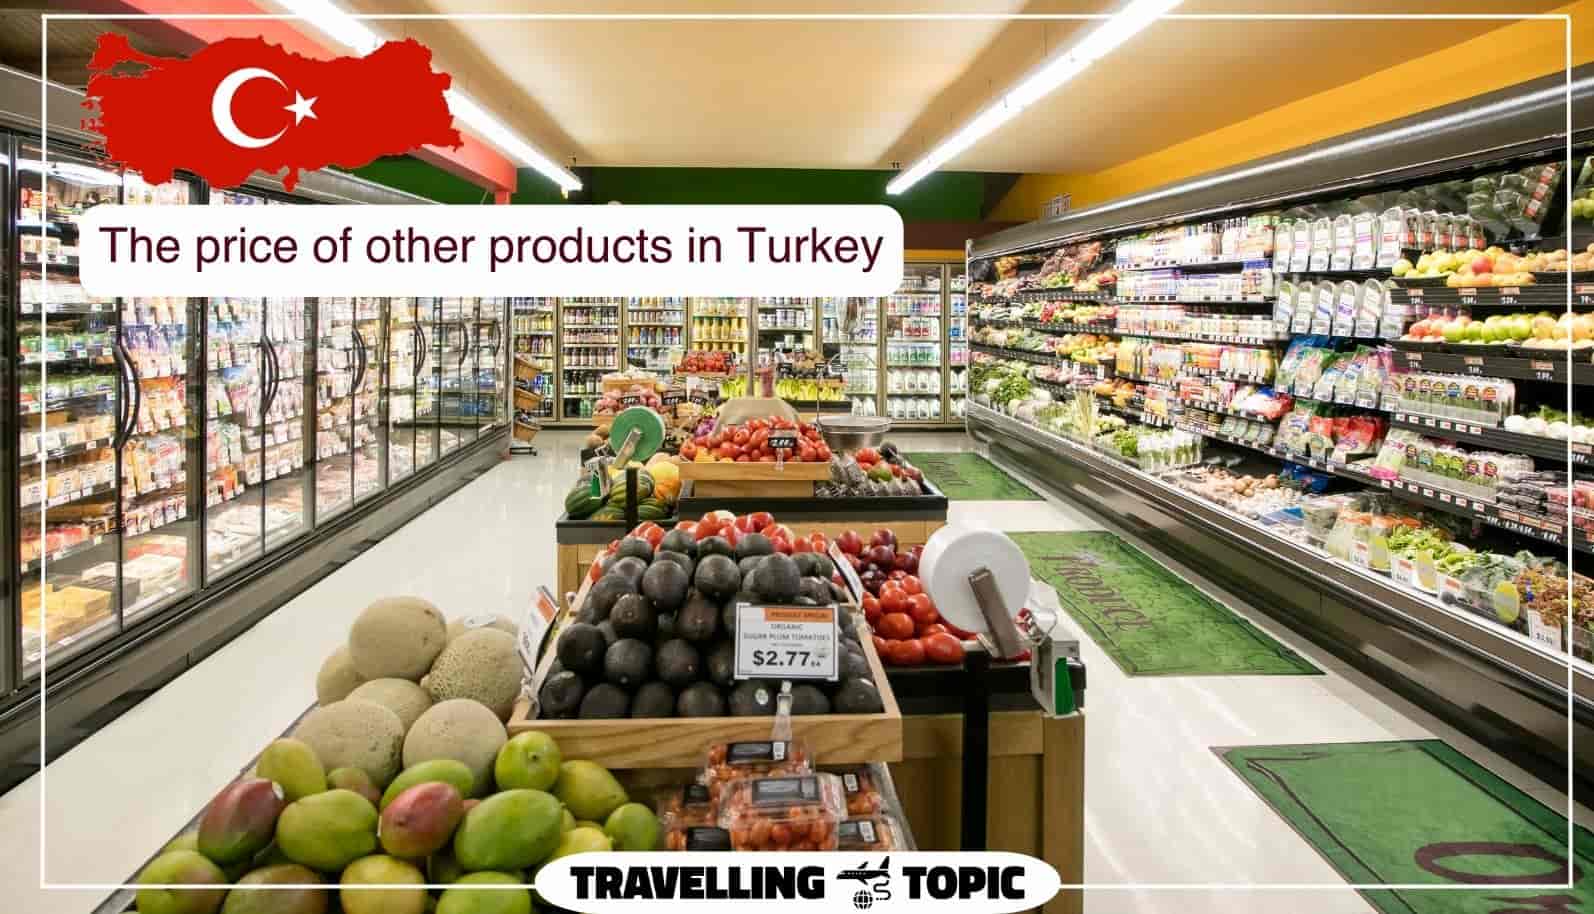 The price of other products in Turkey